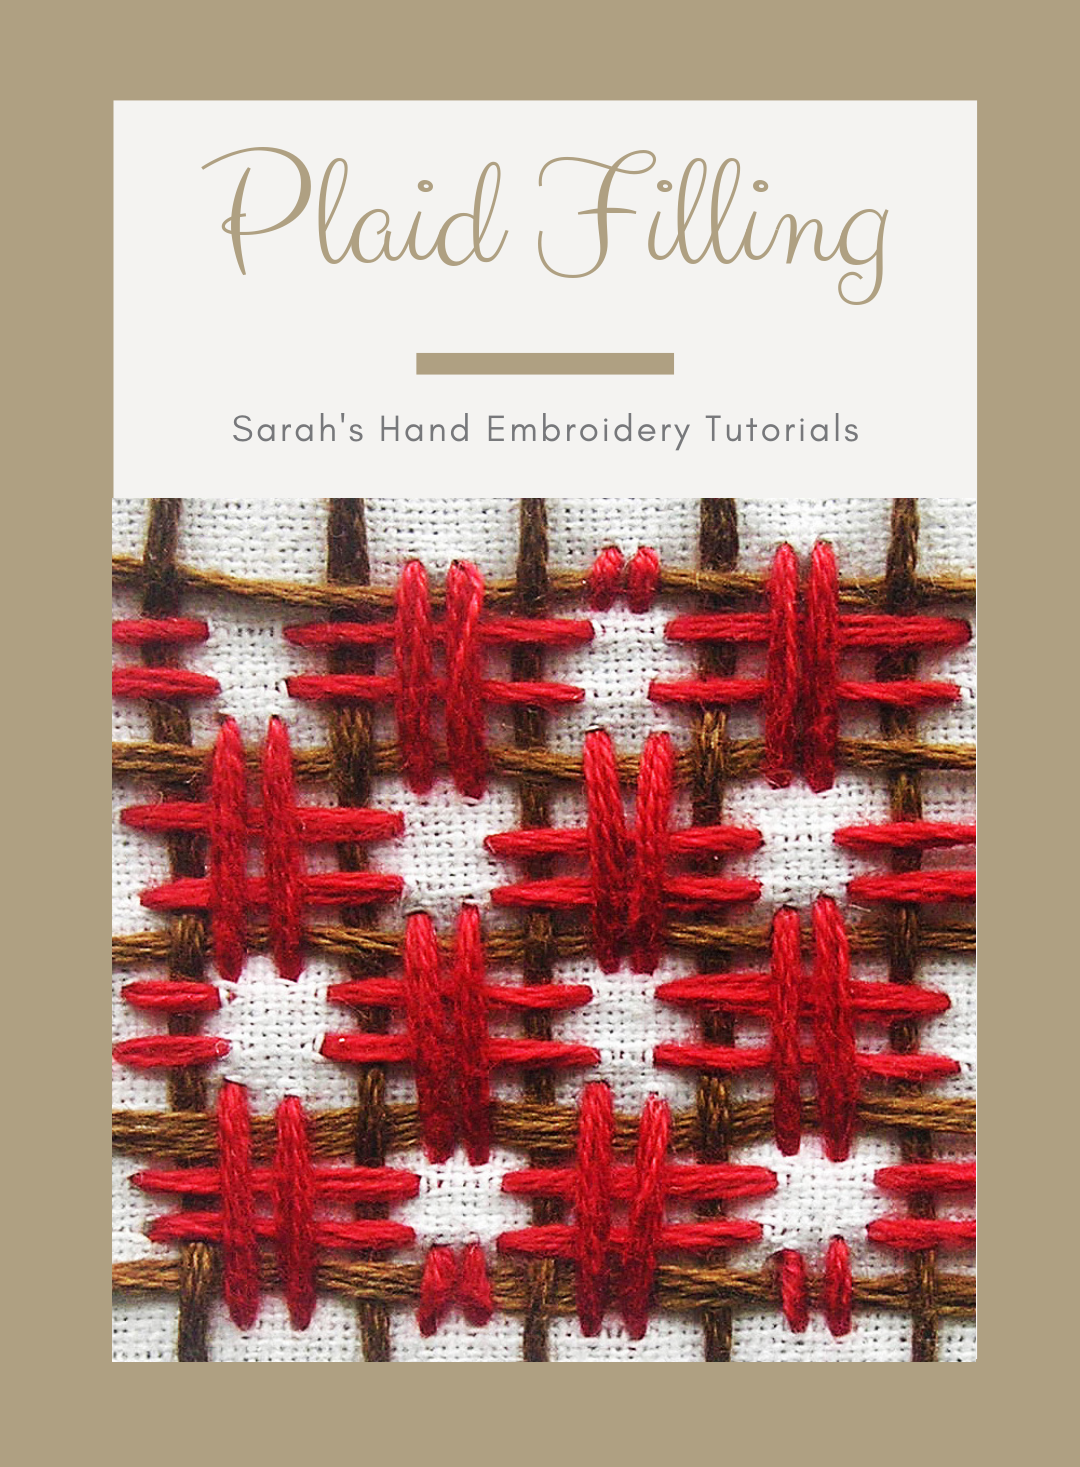 https://www.embroidery.rocksea.org/images/embroidery/plaid-filling-stitch.png